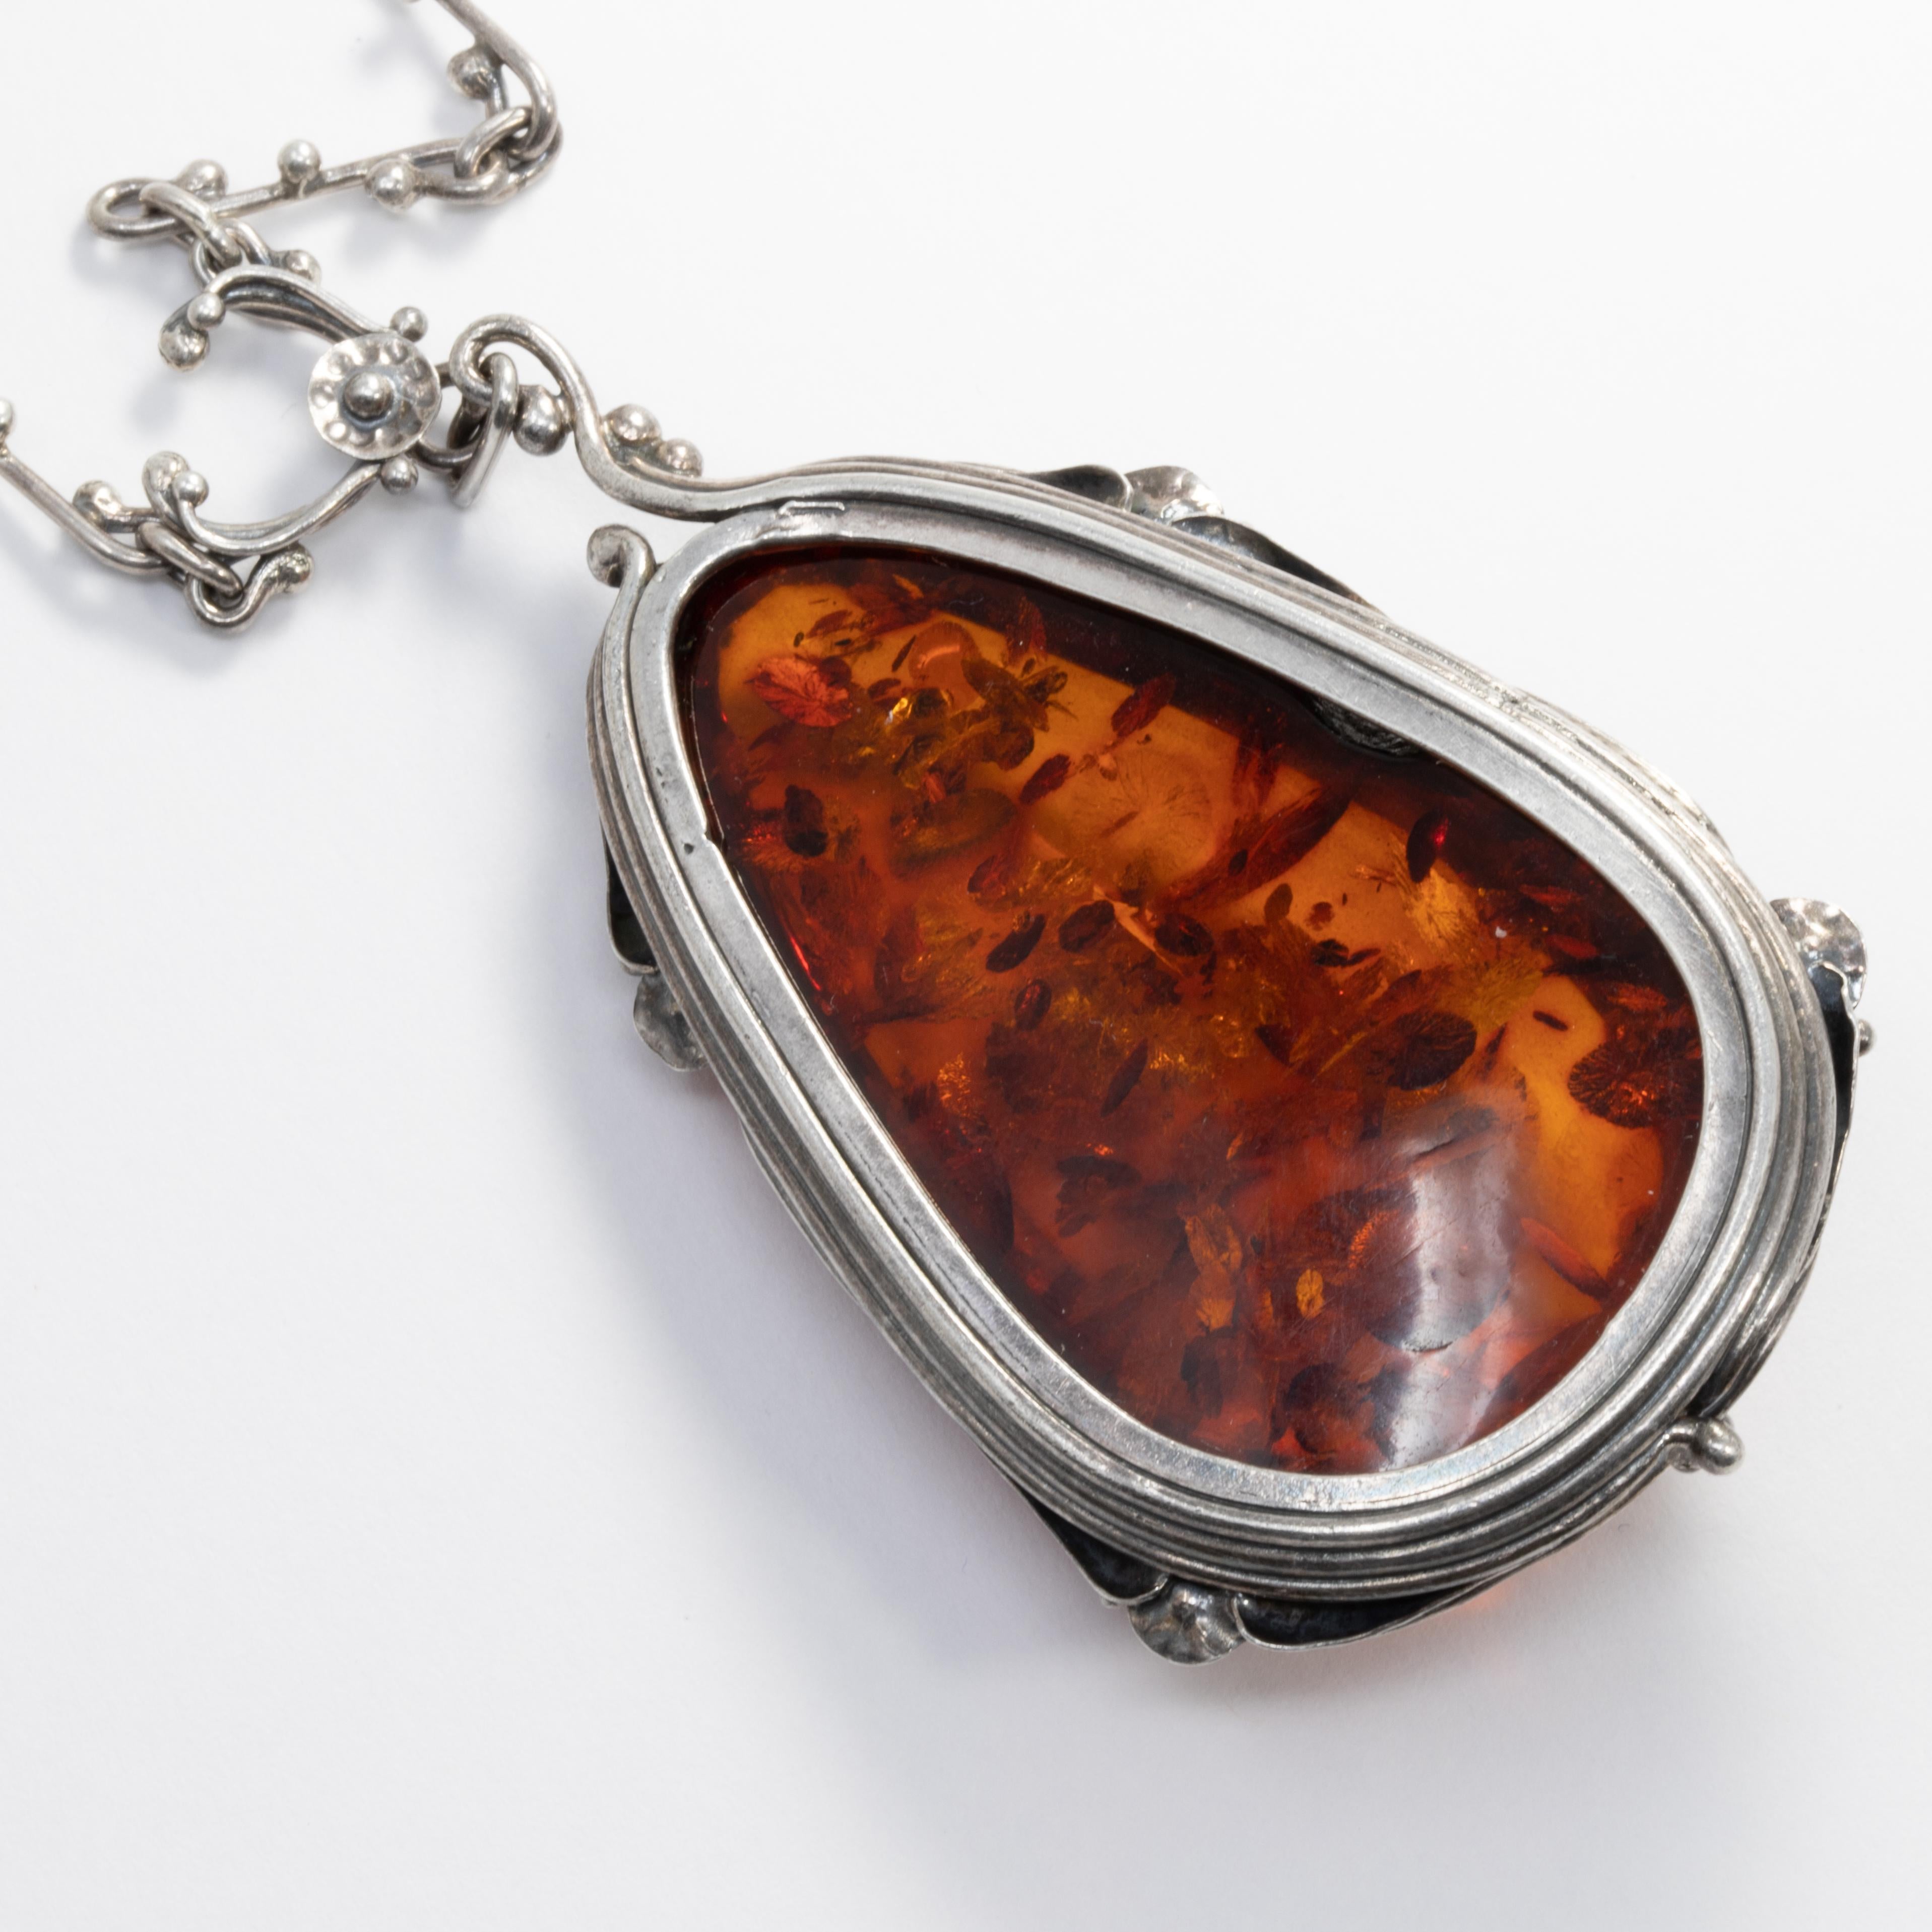 Vintage sterling silver and amber necklace